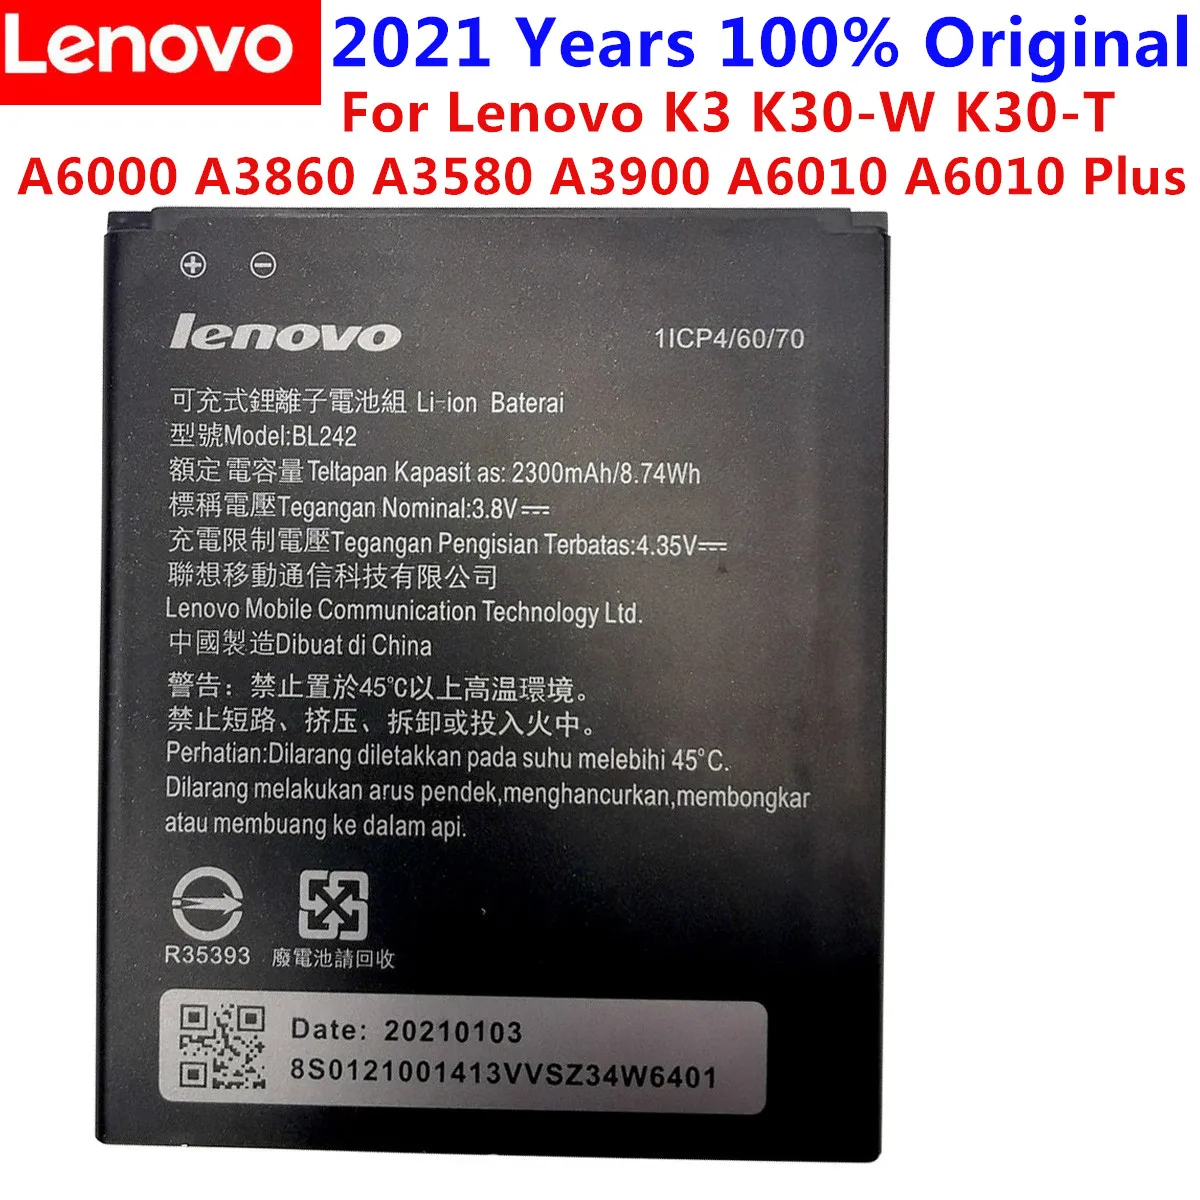 

Original Lenovo A6010 Battery High Quality 2300mAh BL242 Back up Battery Replacement For Lenovo A6010 Plus Mobile Phone Battery